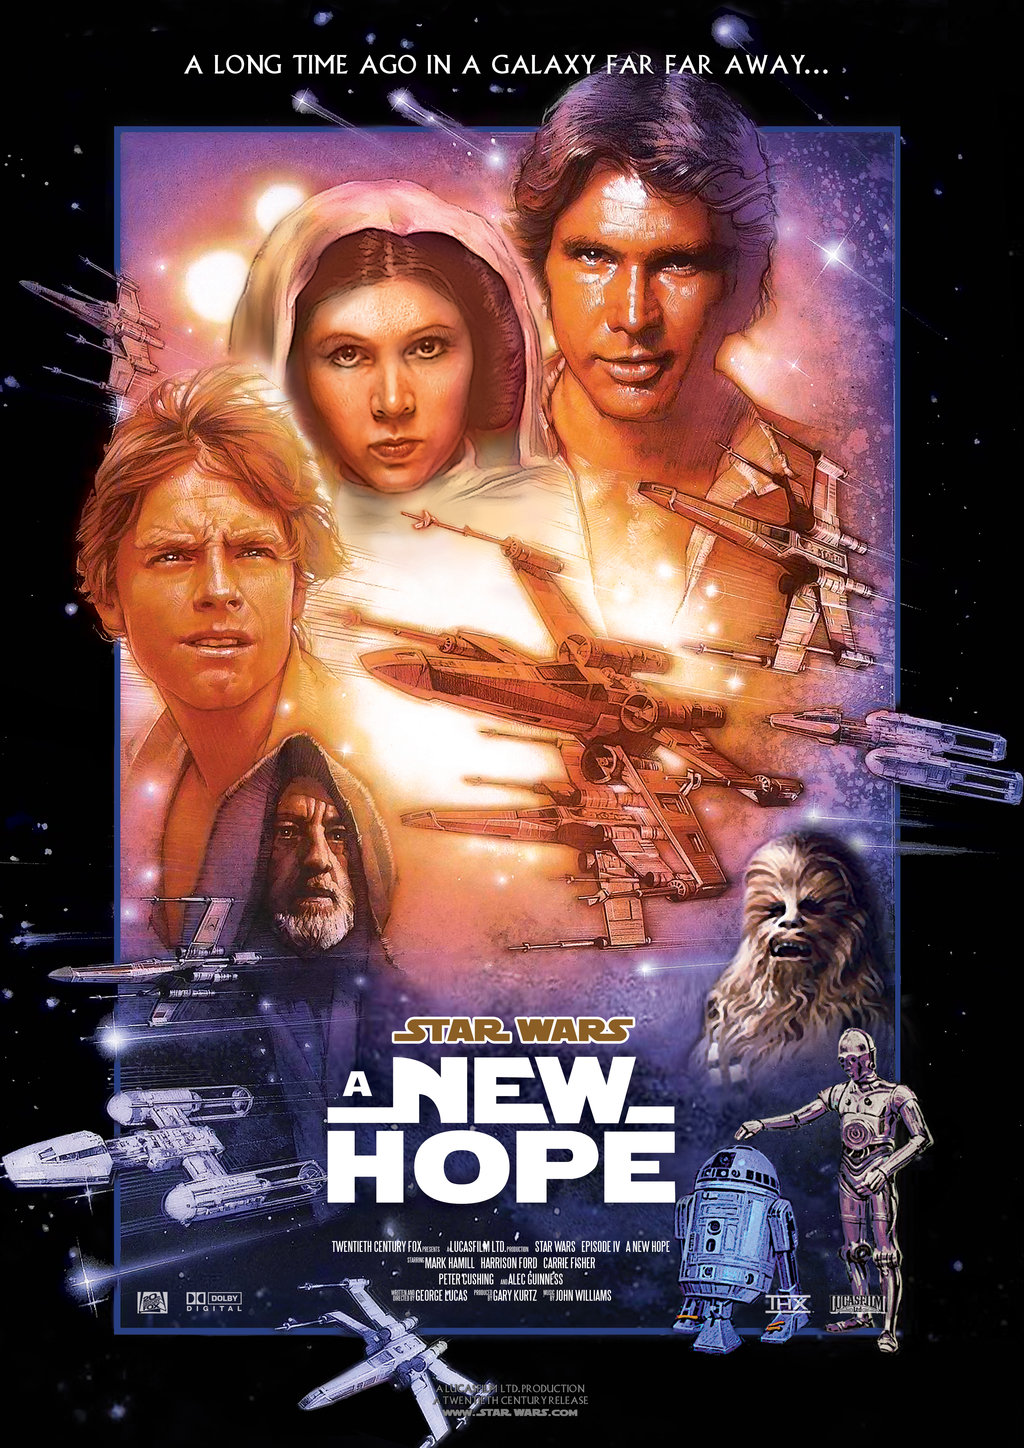 Star wars a new hope poster